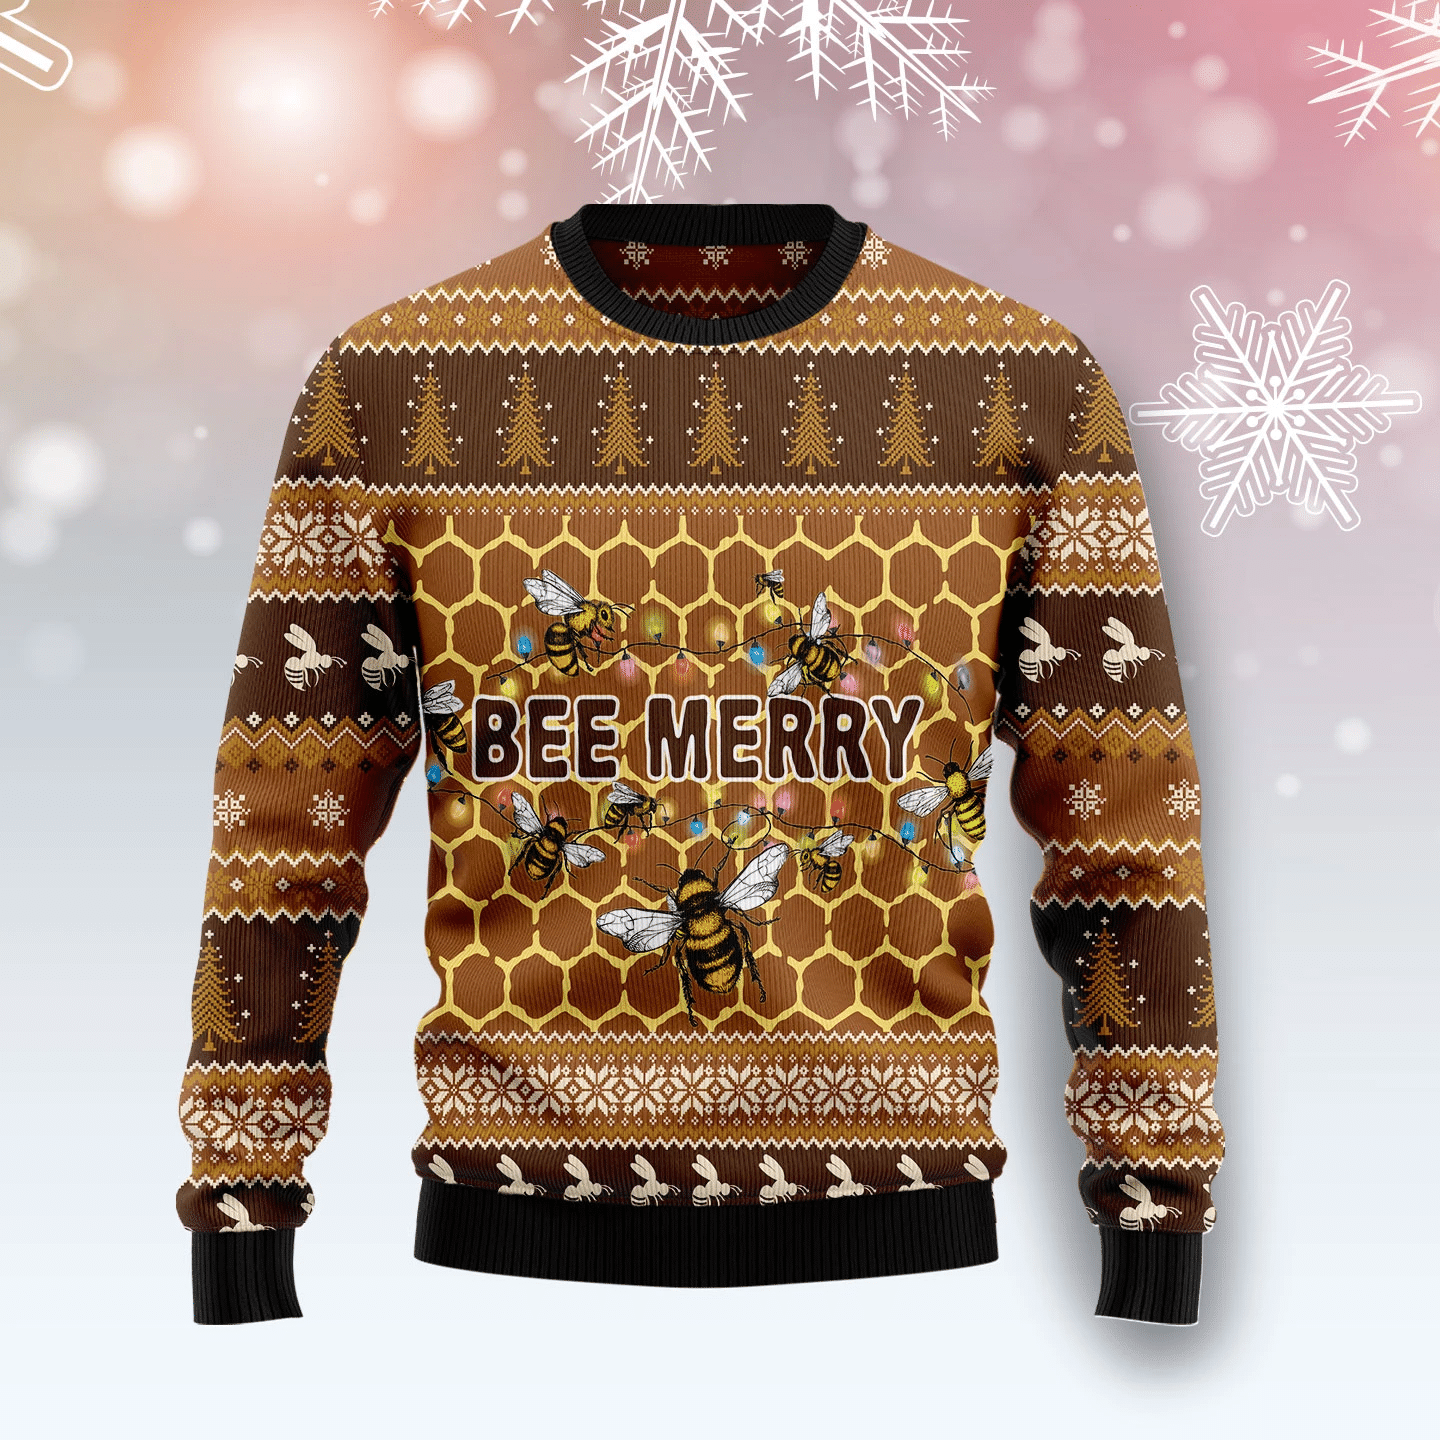 Bee Merry Christmas Ugly Sweater.png